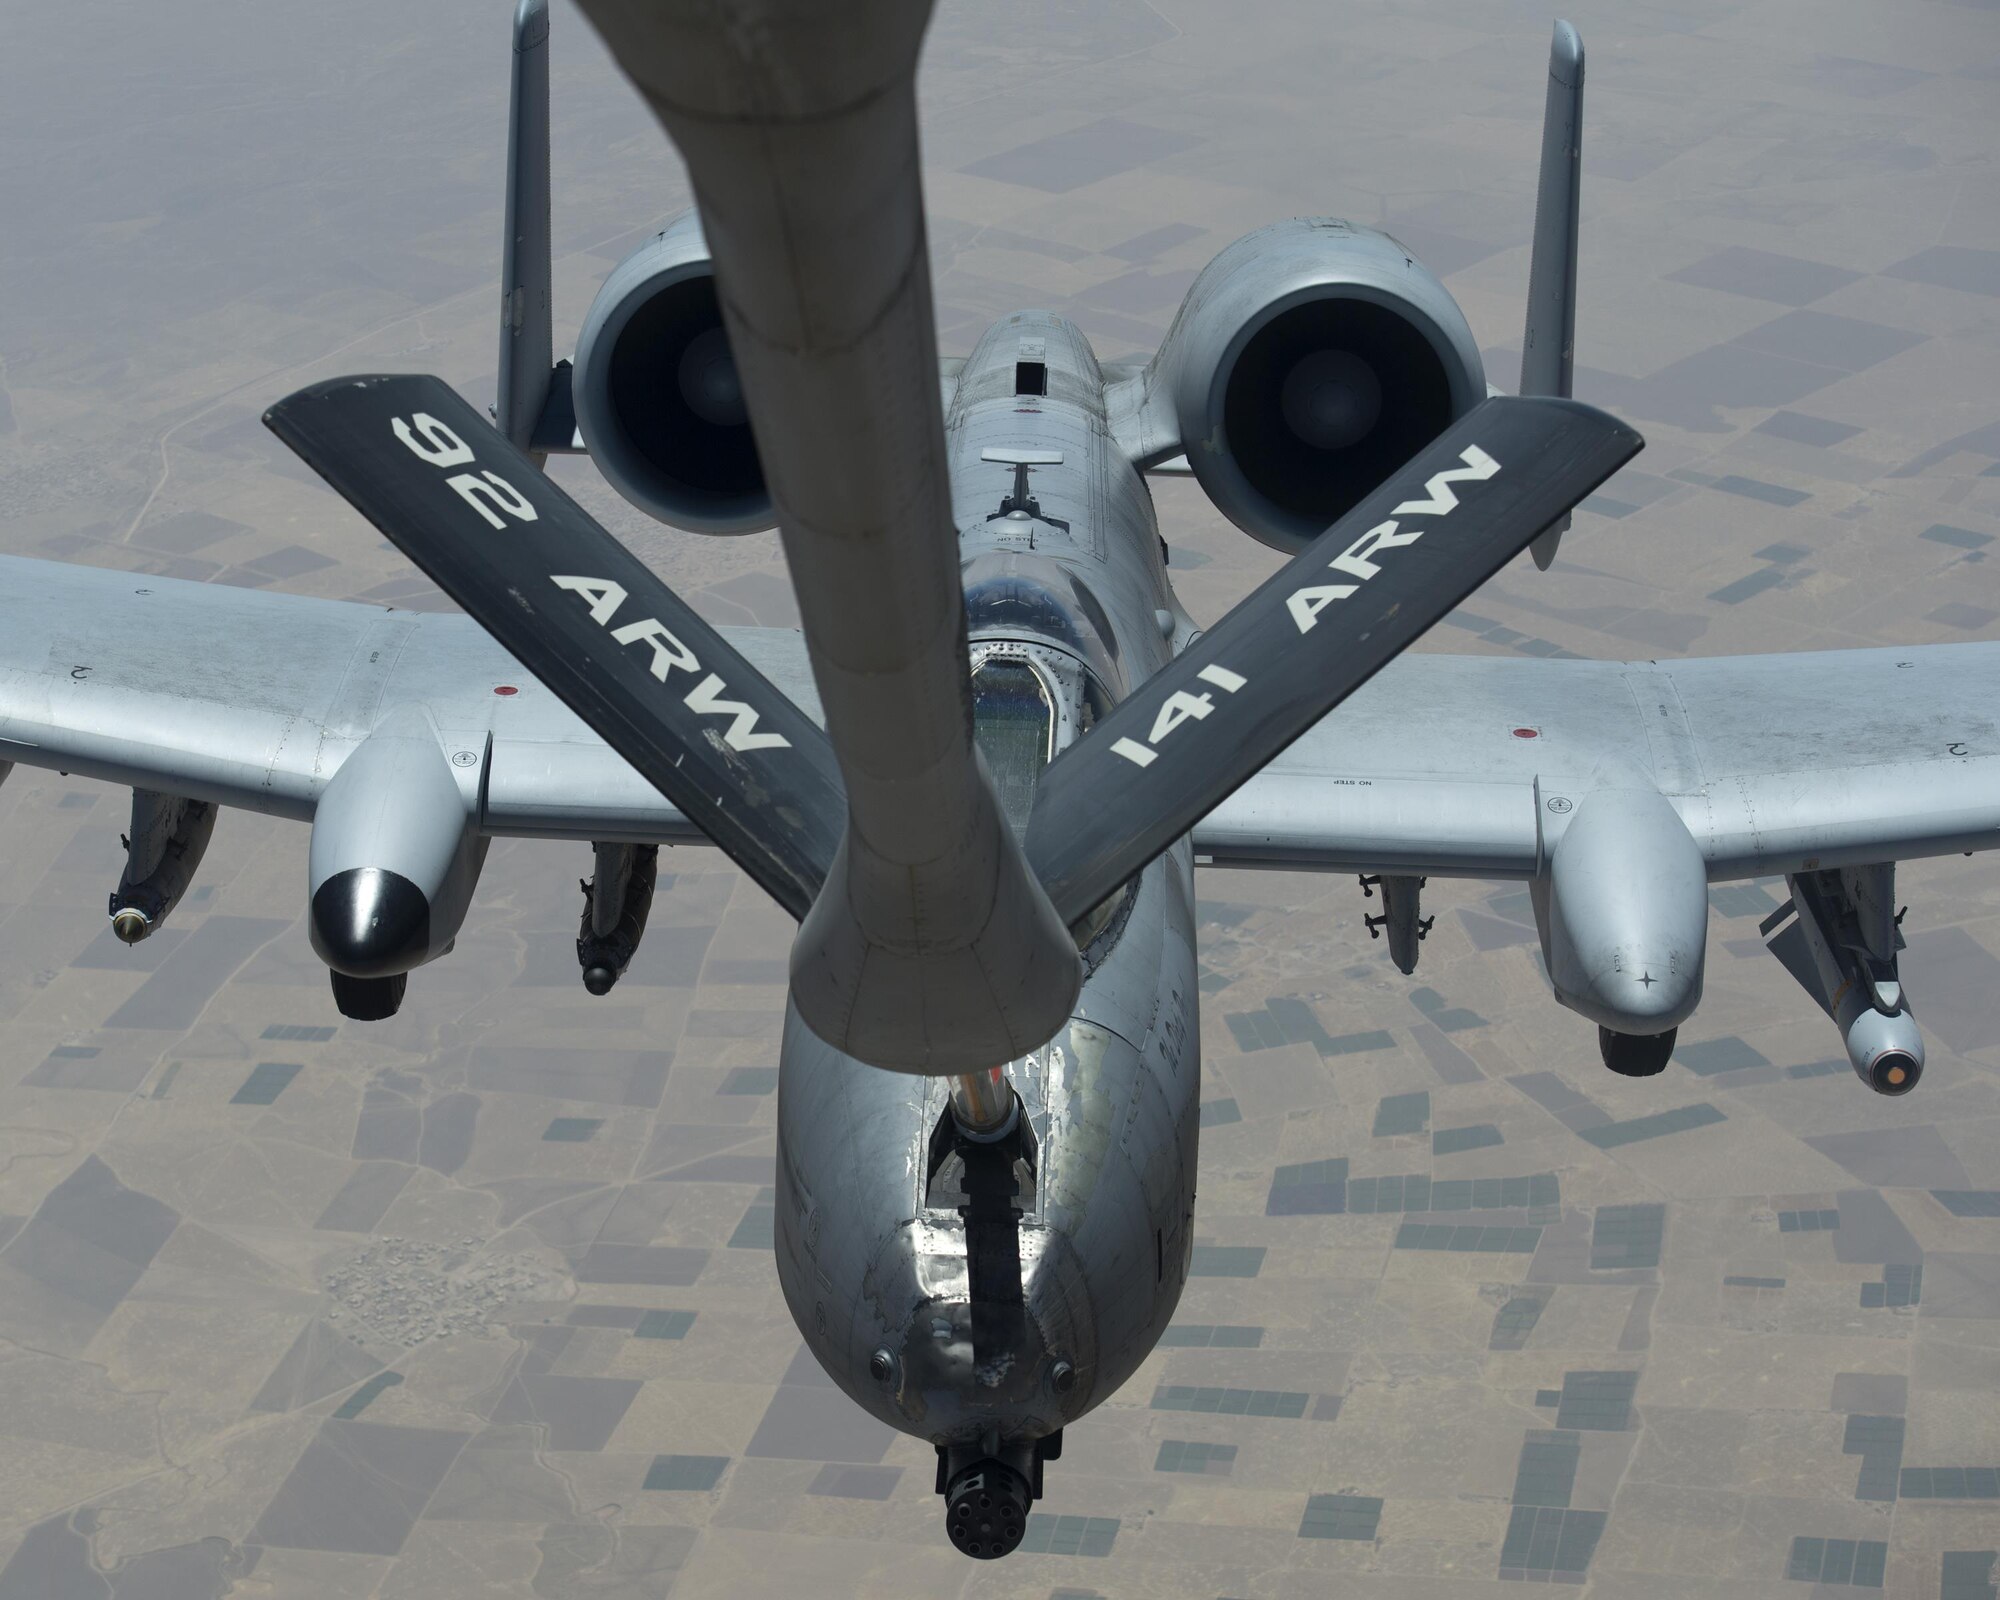 A U.S. A-10 Thunderbolt II receives fuel from a KC-135 Stratotanker assigned to the 340th Expeditionary Air Refueling Squadron during a flight in support of Operation Inherent Resolve on July 1, 2017. The KC-135 Stratotanker provides aerial refueling support to U.S. and coalition aircraft 24/7 throughout the U.S. Air Forces Central Command area of responsibility. (U.S. Air Force photo by Tech. Sgt. Amy M. Lovgren)